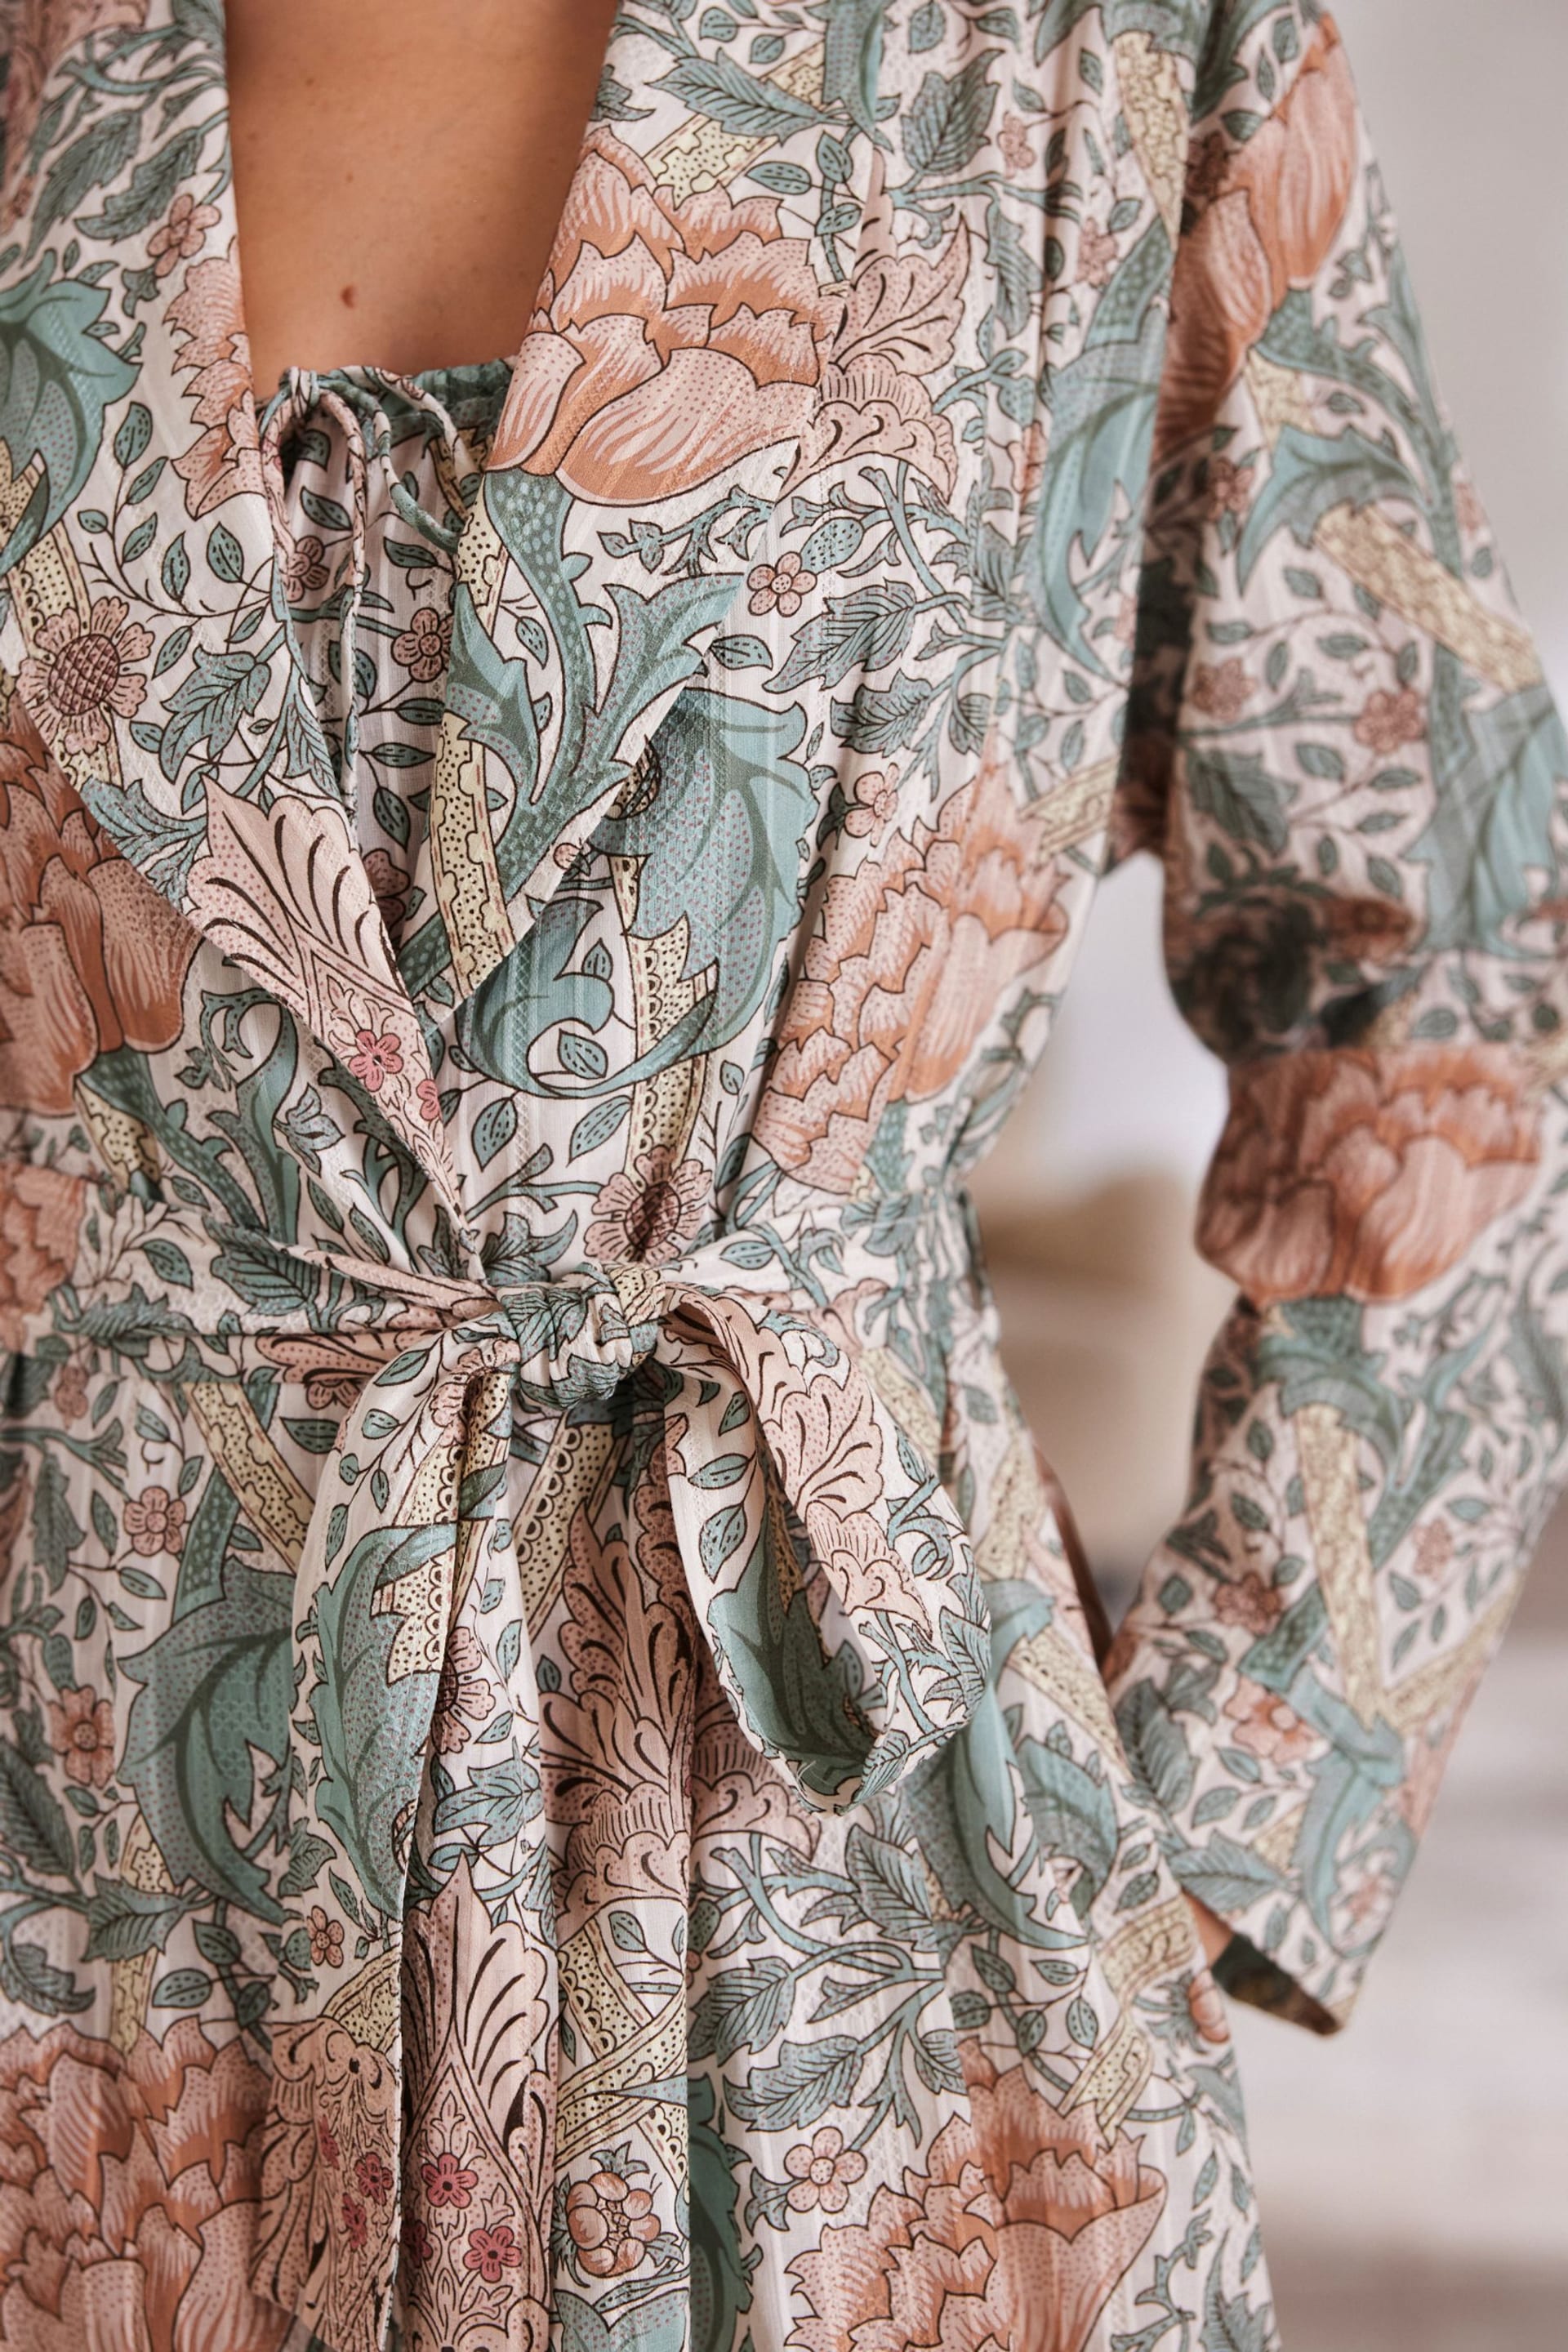 Green Morris & Co. Floral Robe - Image 7 of 10